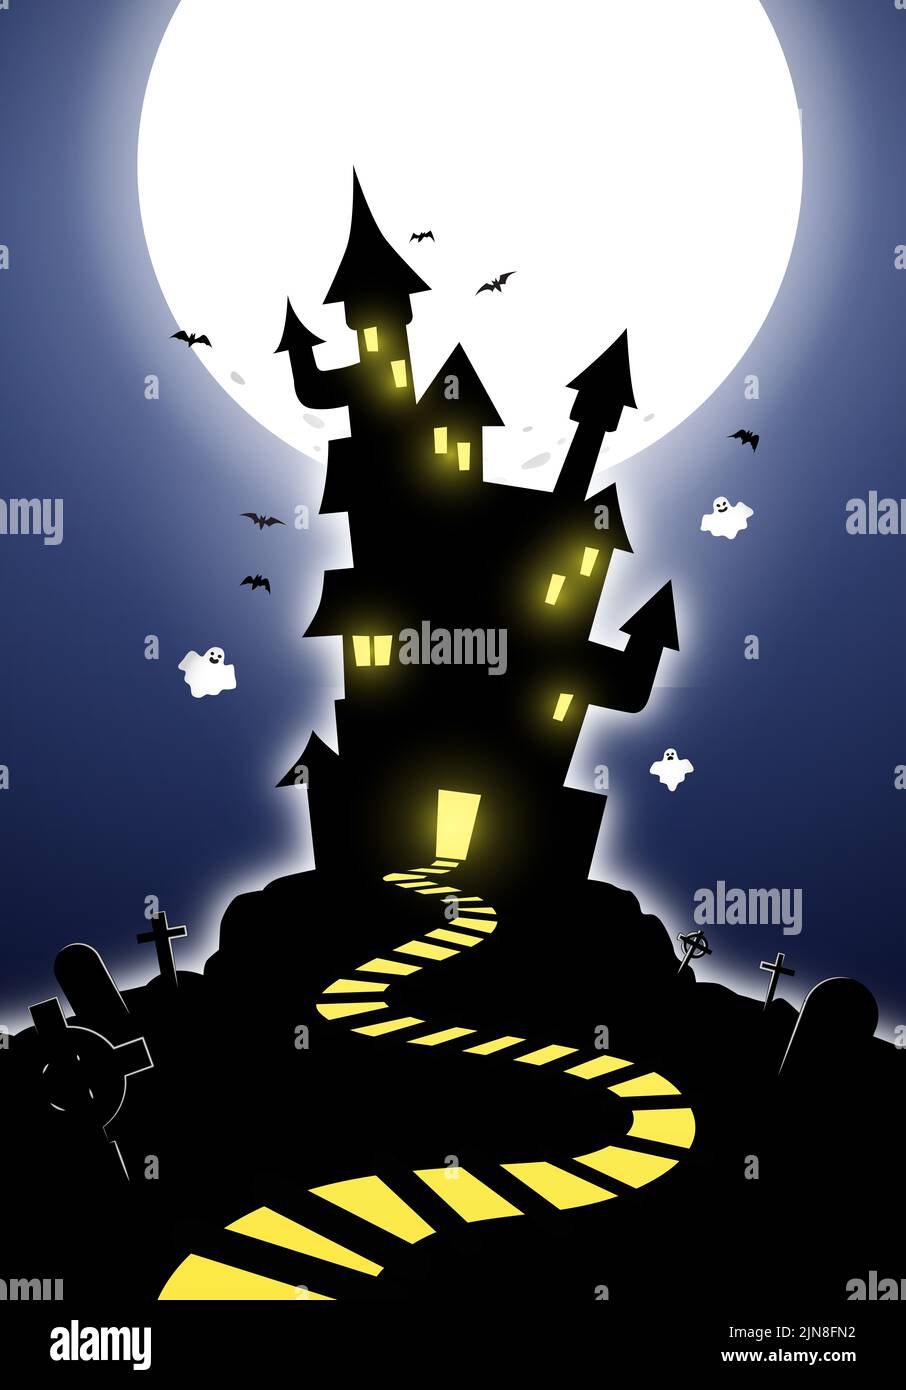 Halloween party celebration poster illustration. Dark haunted castle with a cemetary. Full moon withh ghosts flying in a night sky. Stock Photo